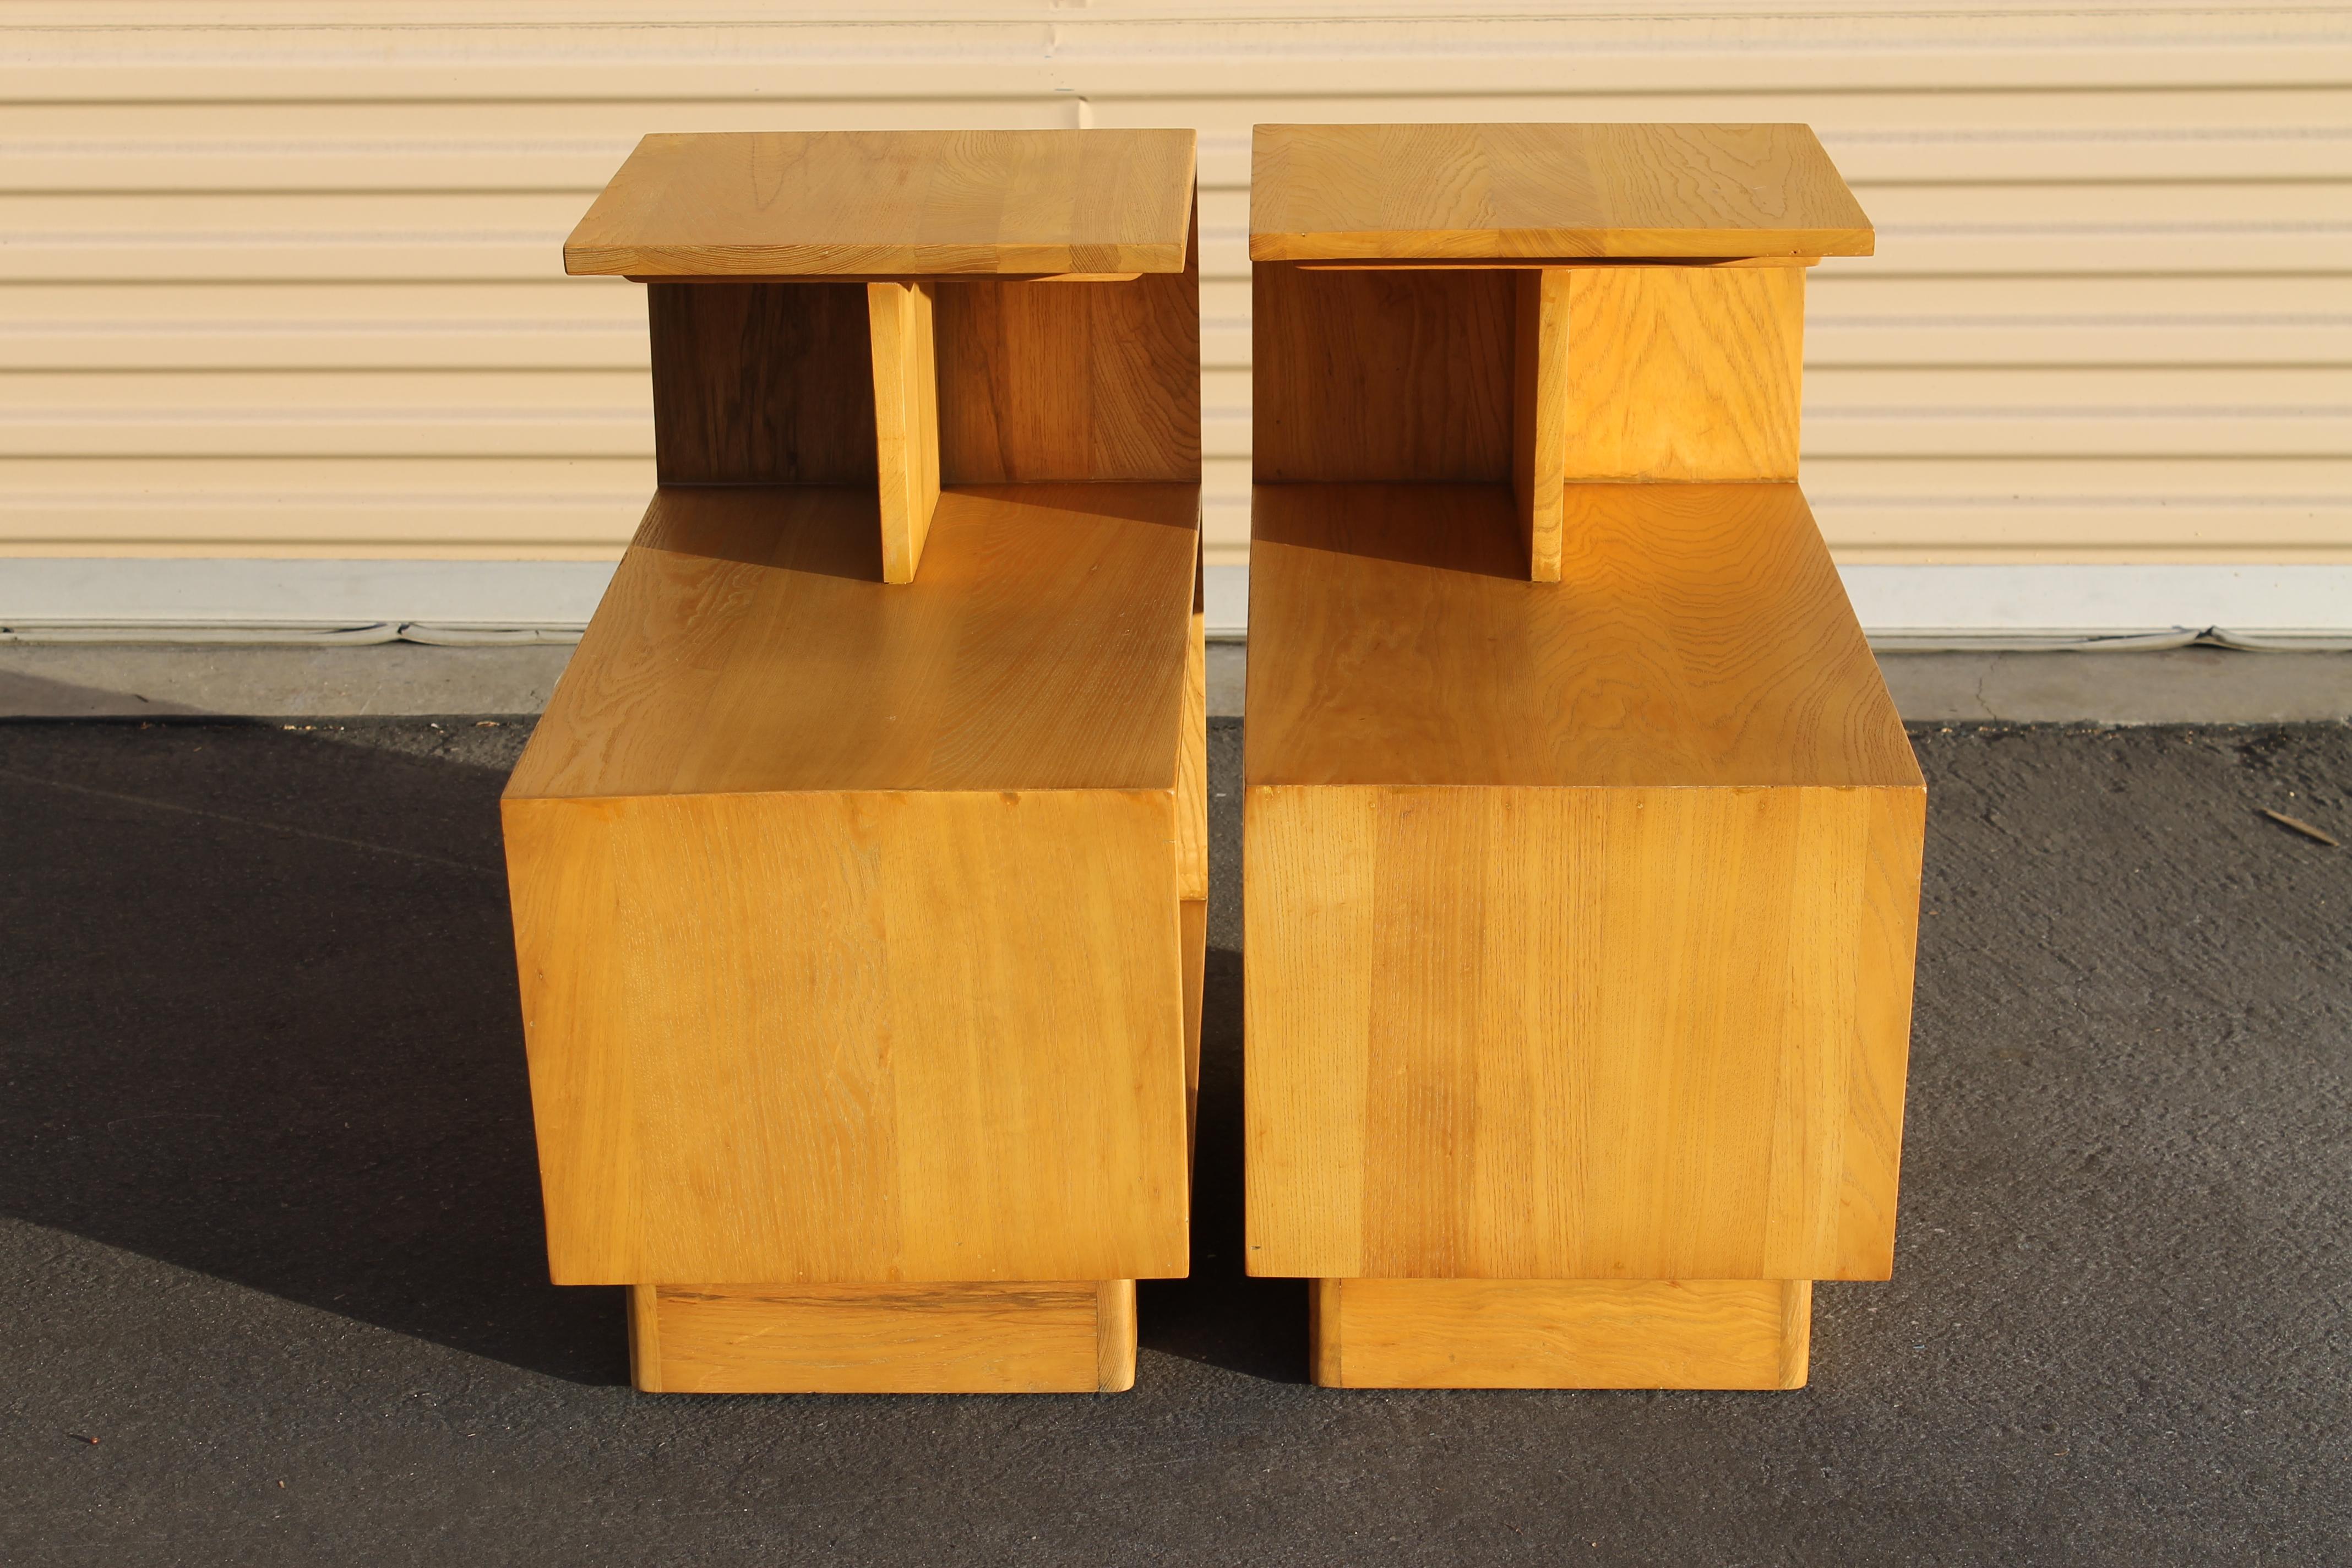 Pair of streamline moderne oak end tables. These were originally painted black. We had them refinished back to their wonderful oak finish. Measures: Tables are 15